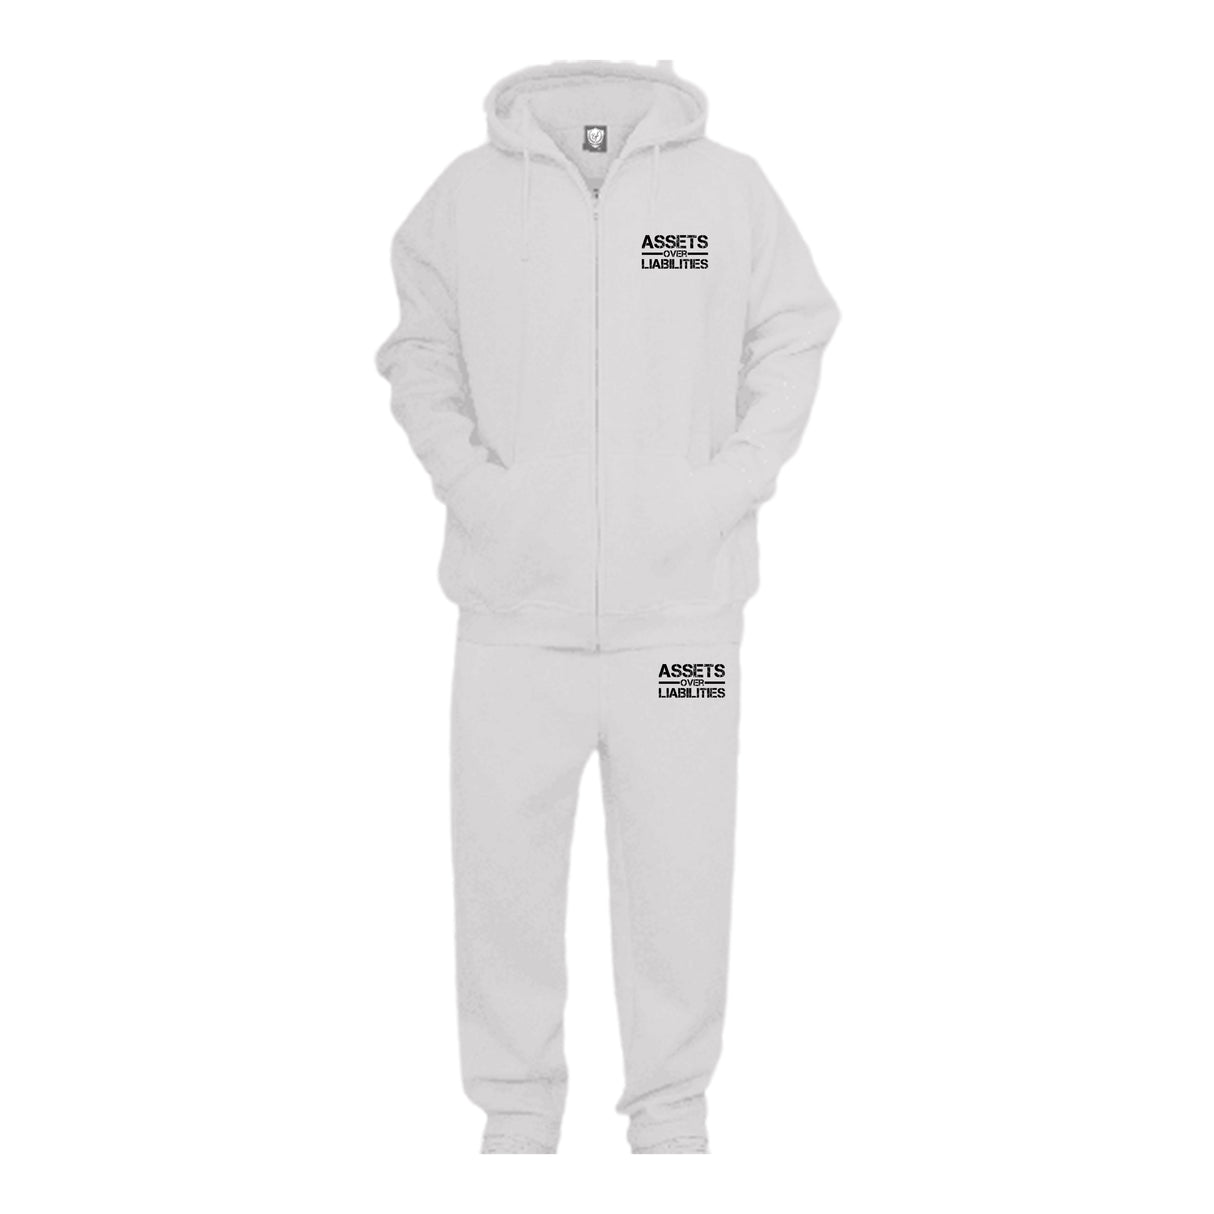 Assets Over Liabilities Unisex Hooded Tracksuit